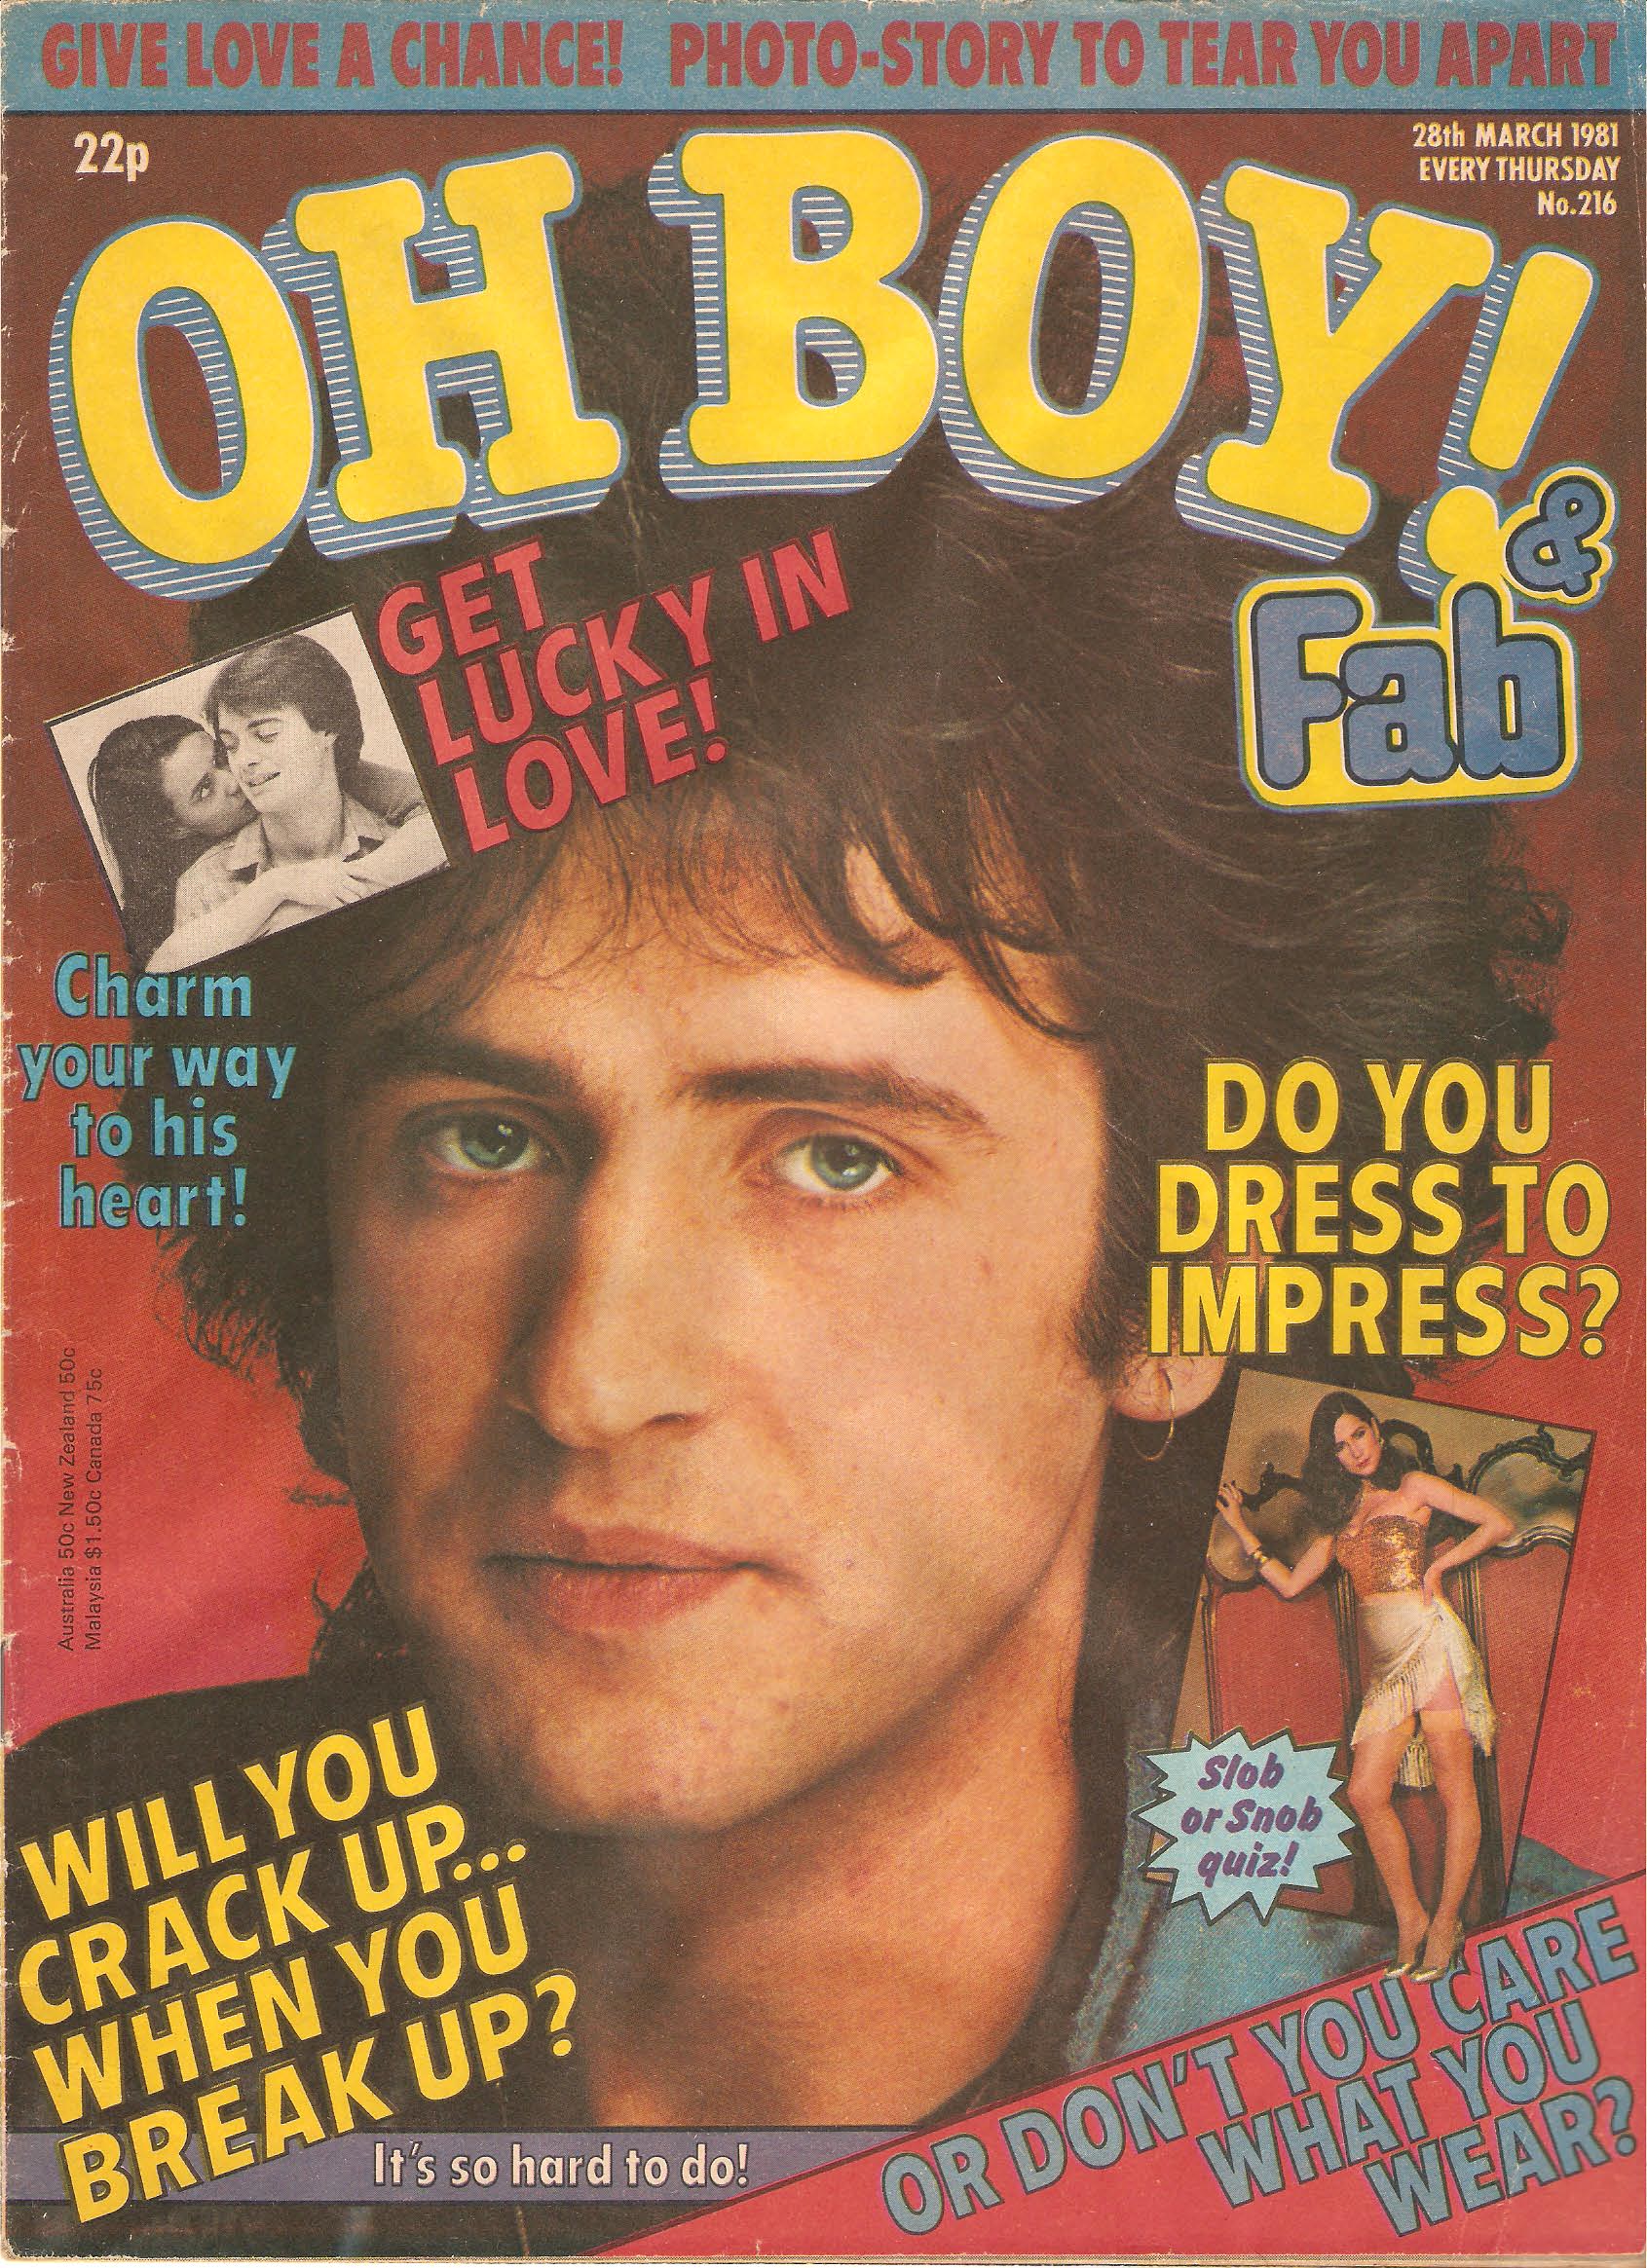 David on Front Cover When he was 17